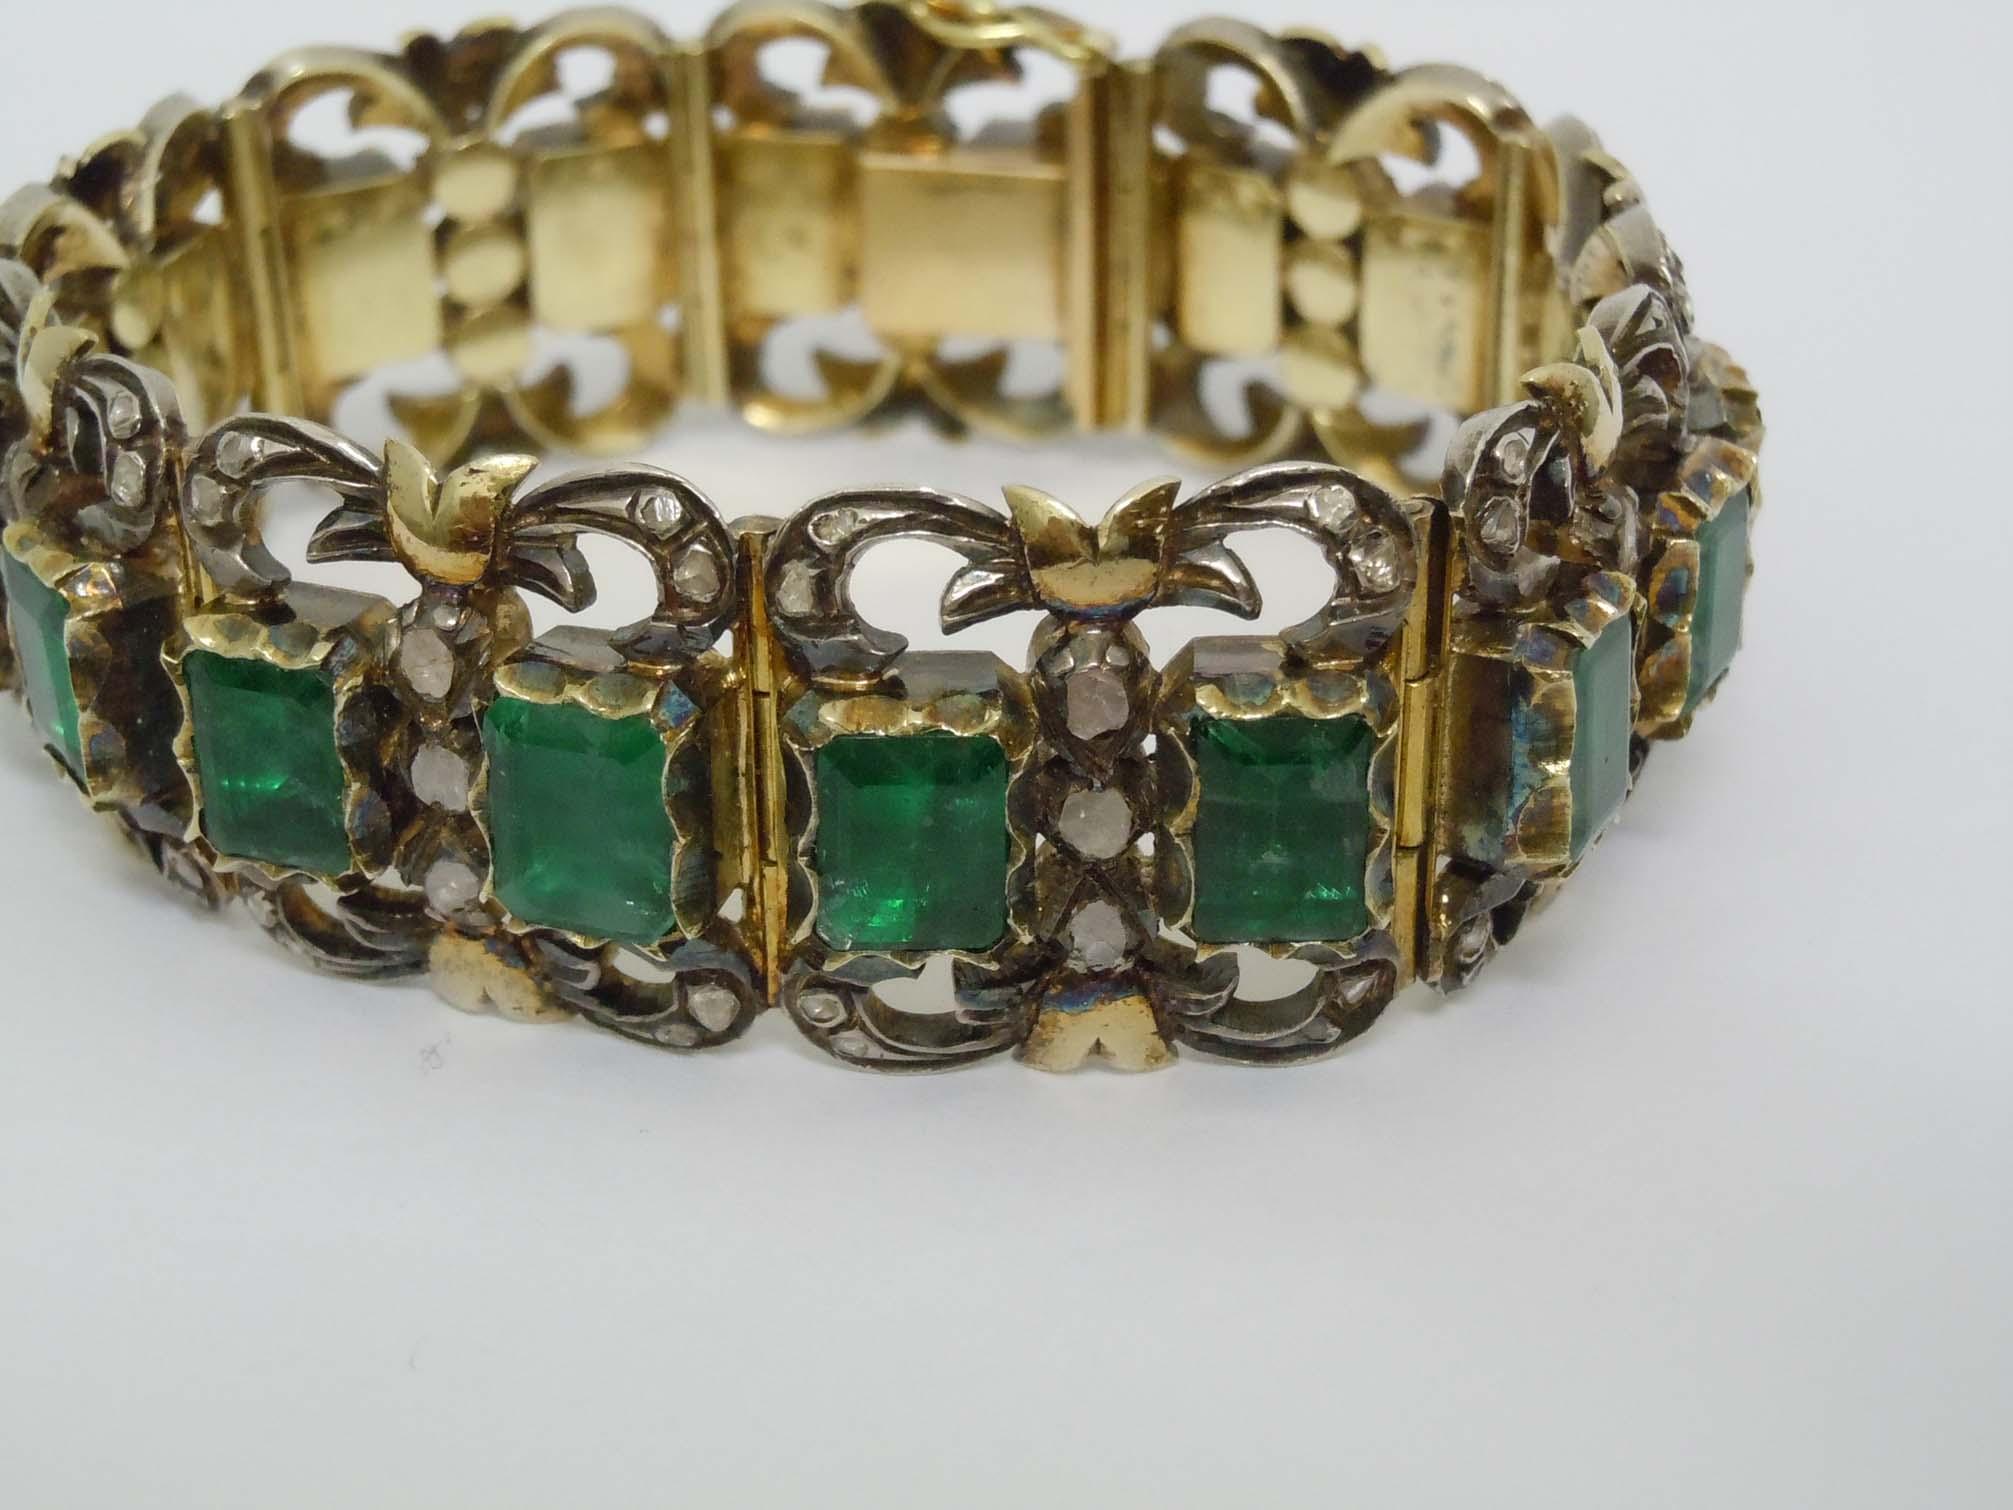 GEORGIAN SILVER AND GOLD DIAMOND GREEN CHALCEDONY BRACELET, OLD MINE-CUT AND ROSE-CUT, 68.4 GRAMS